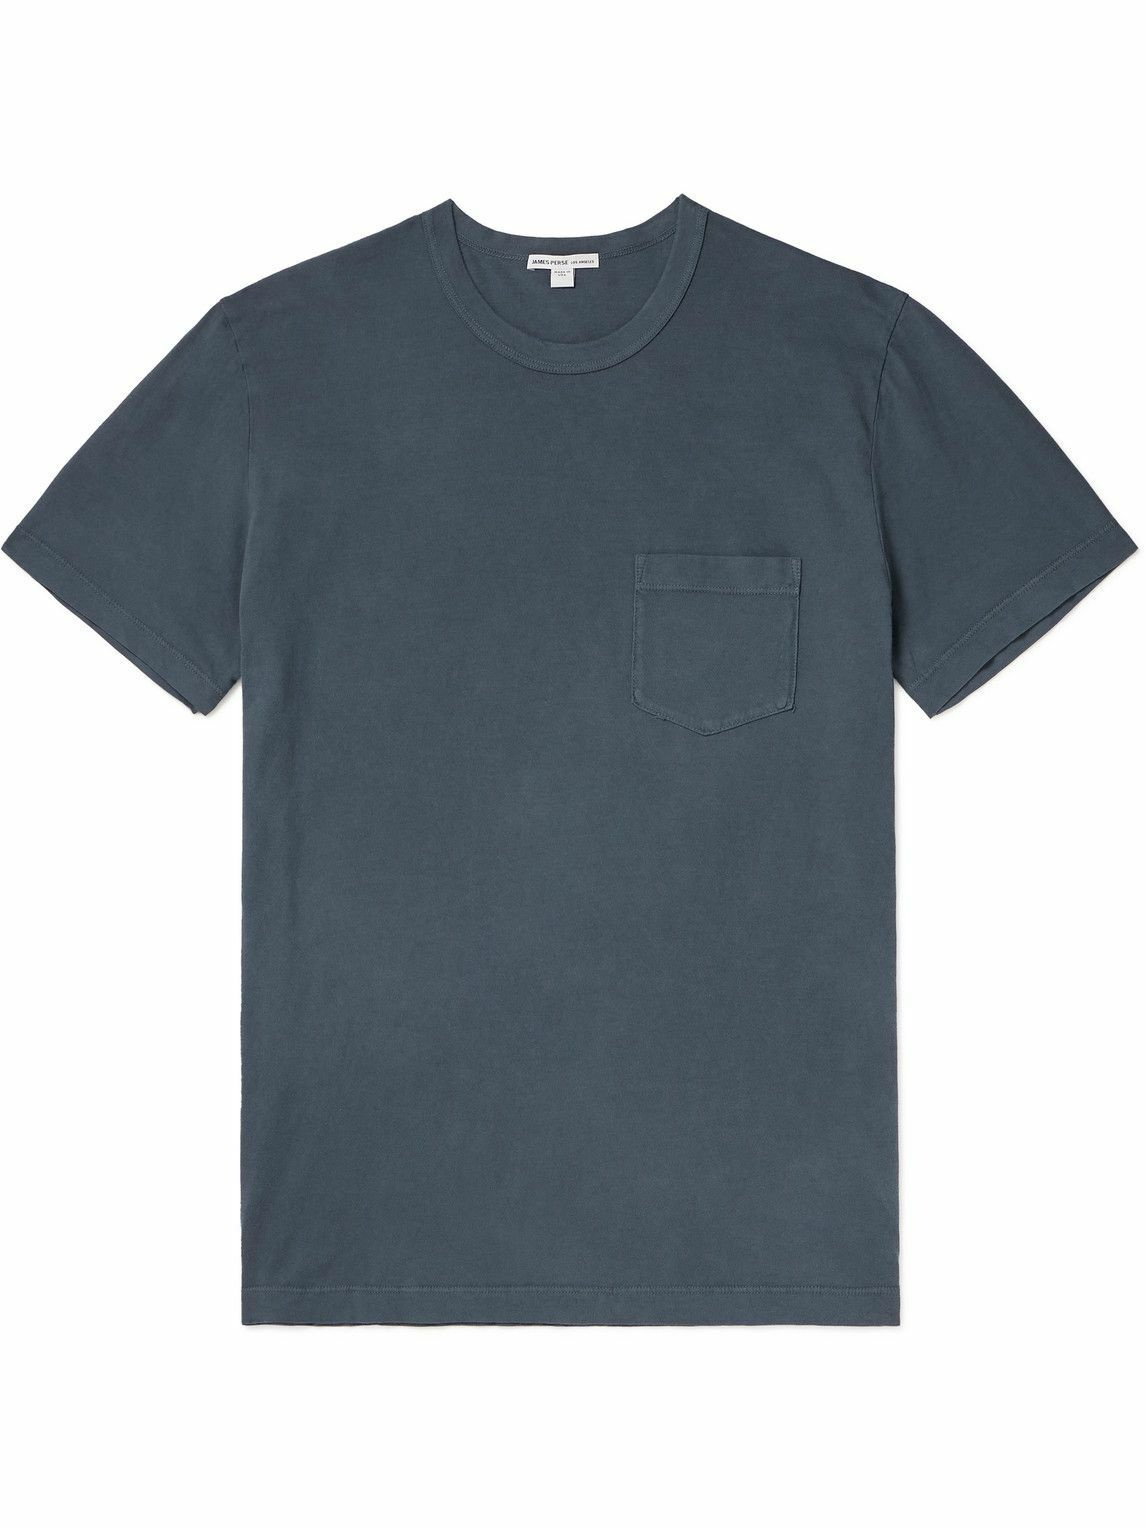 James Perse - Combed Cotton-Jersey T-Shirt - Blue James Perse